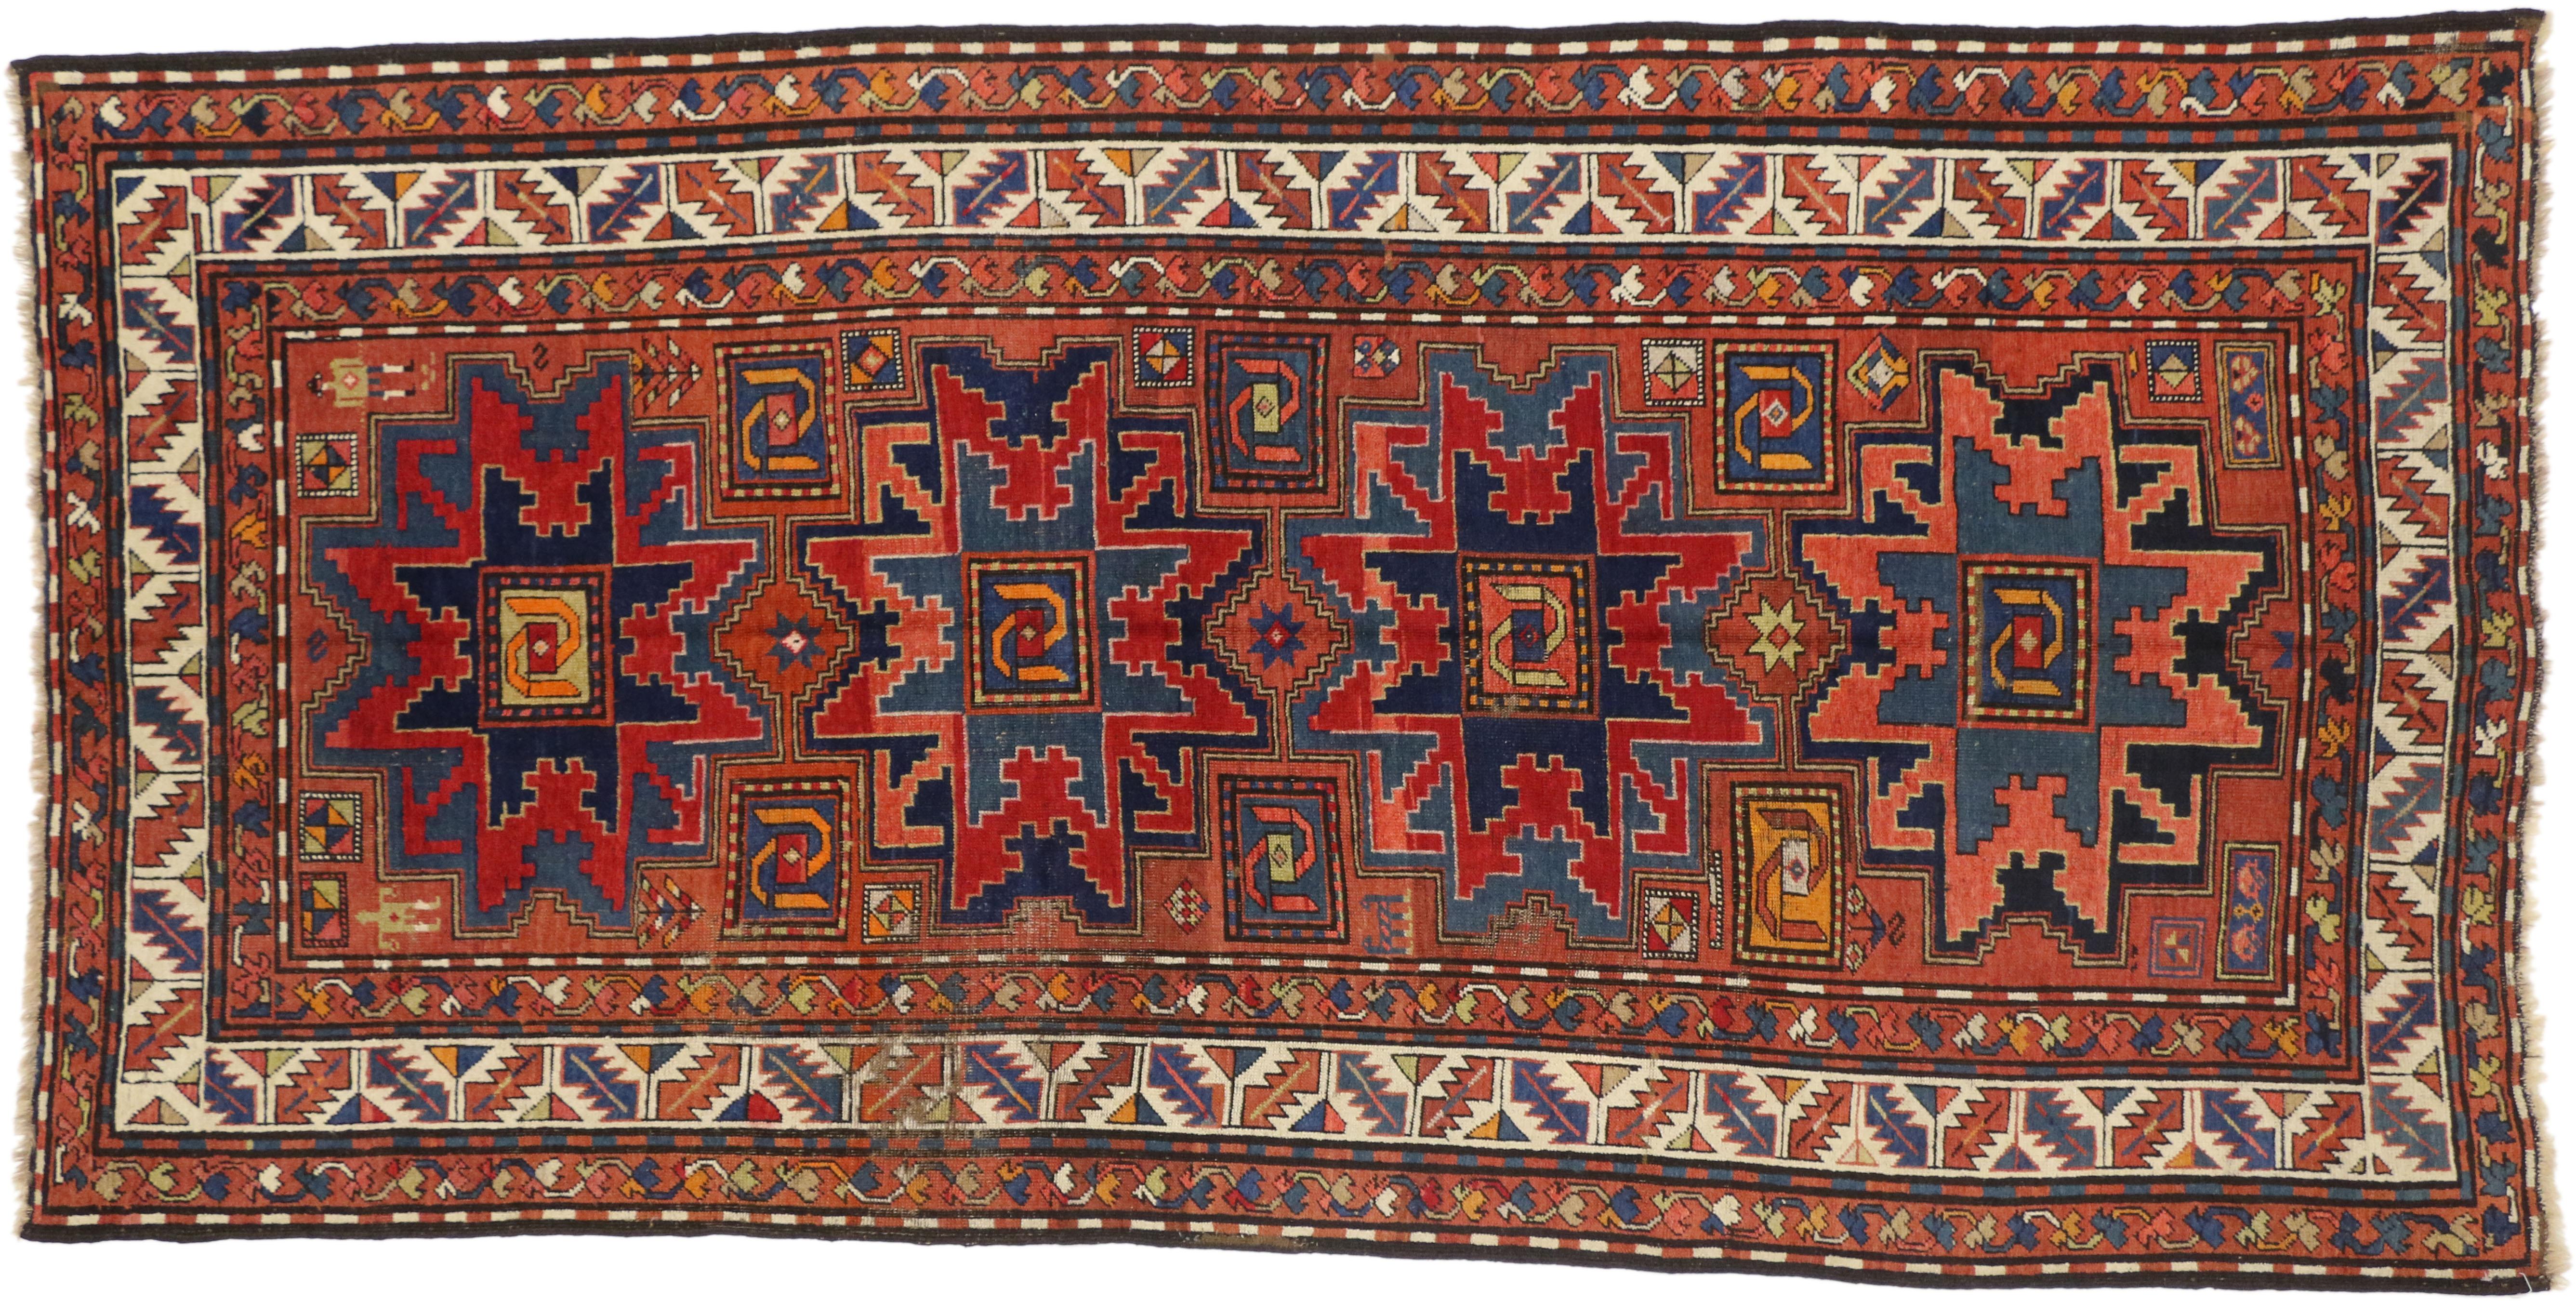 Antique Caucasian Kazak Rug, Nomadic Charm Meets Stylish Durability In Good Condition For Sale In Dallas, TX